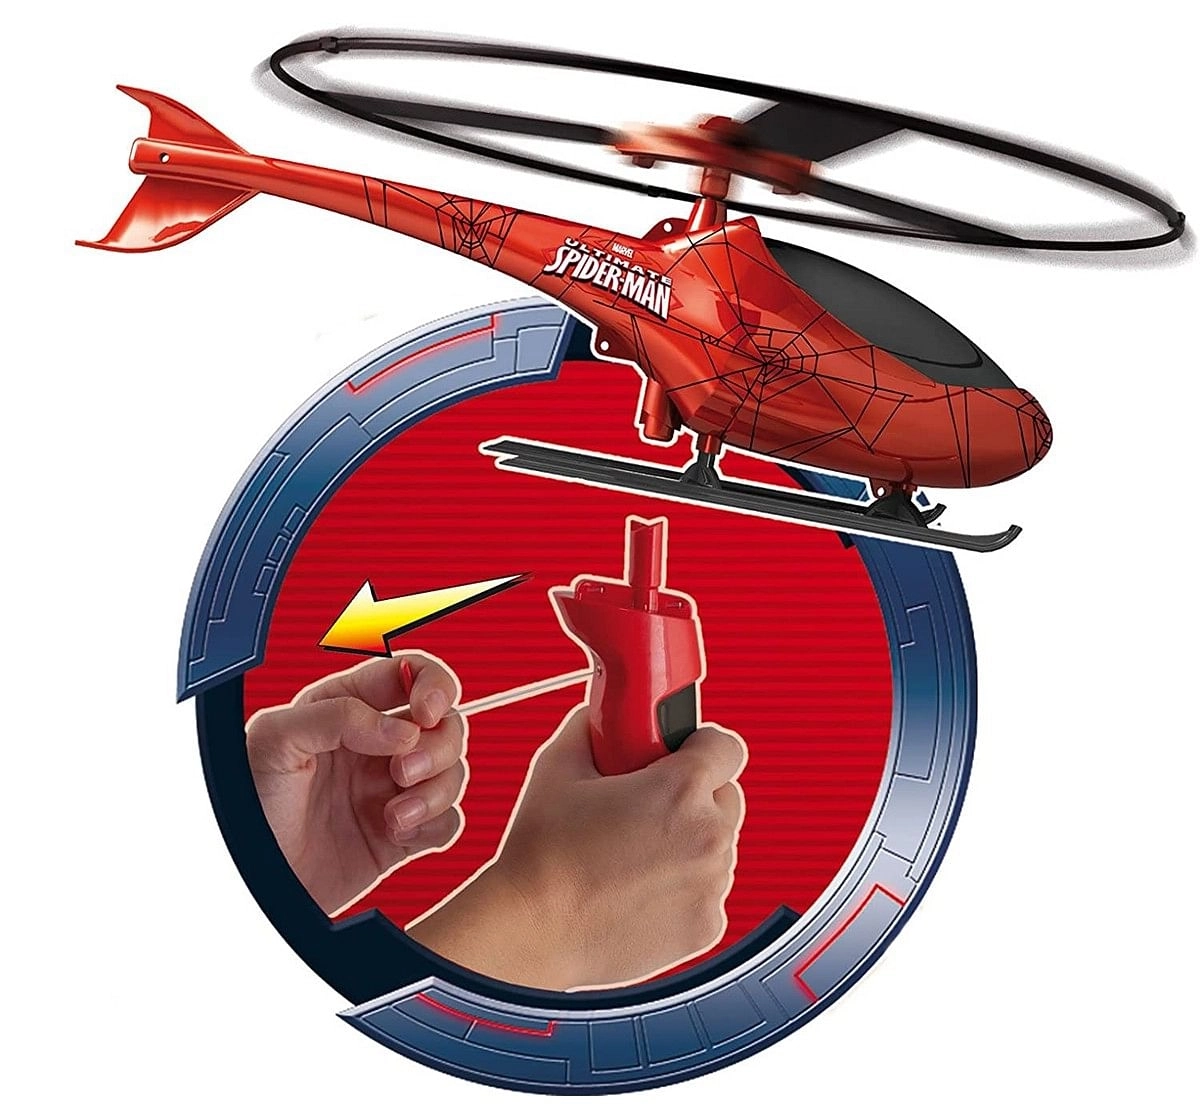 Marvel Spiderman Rescue Helicopter Red